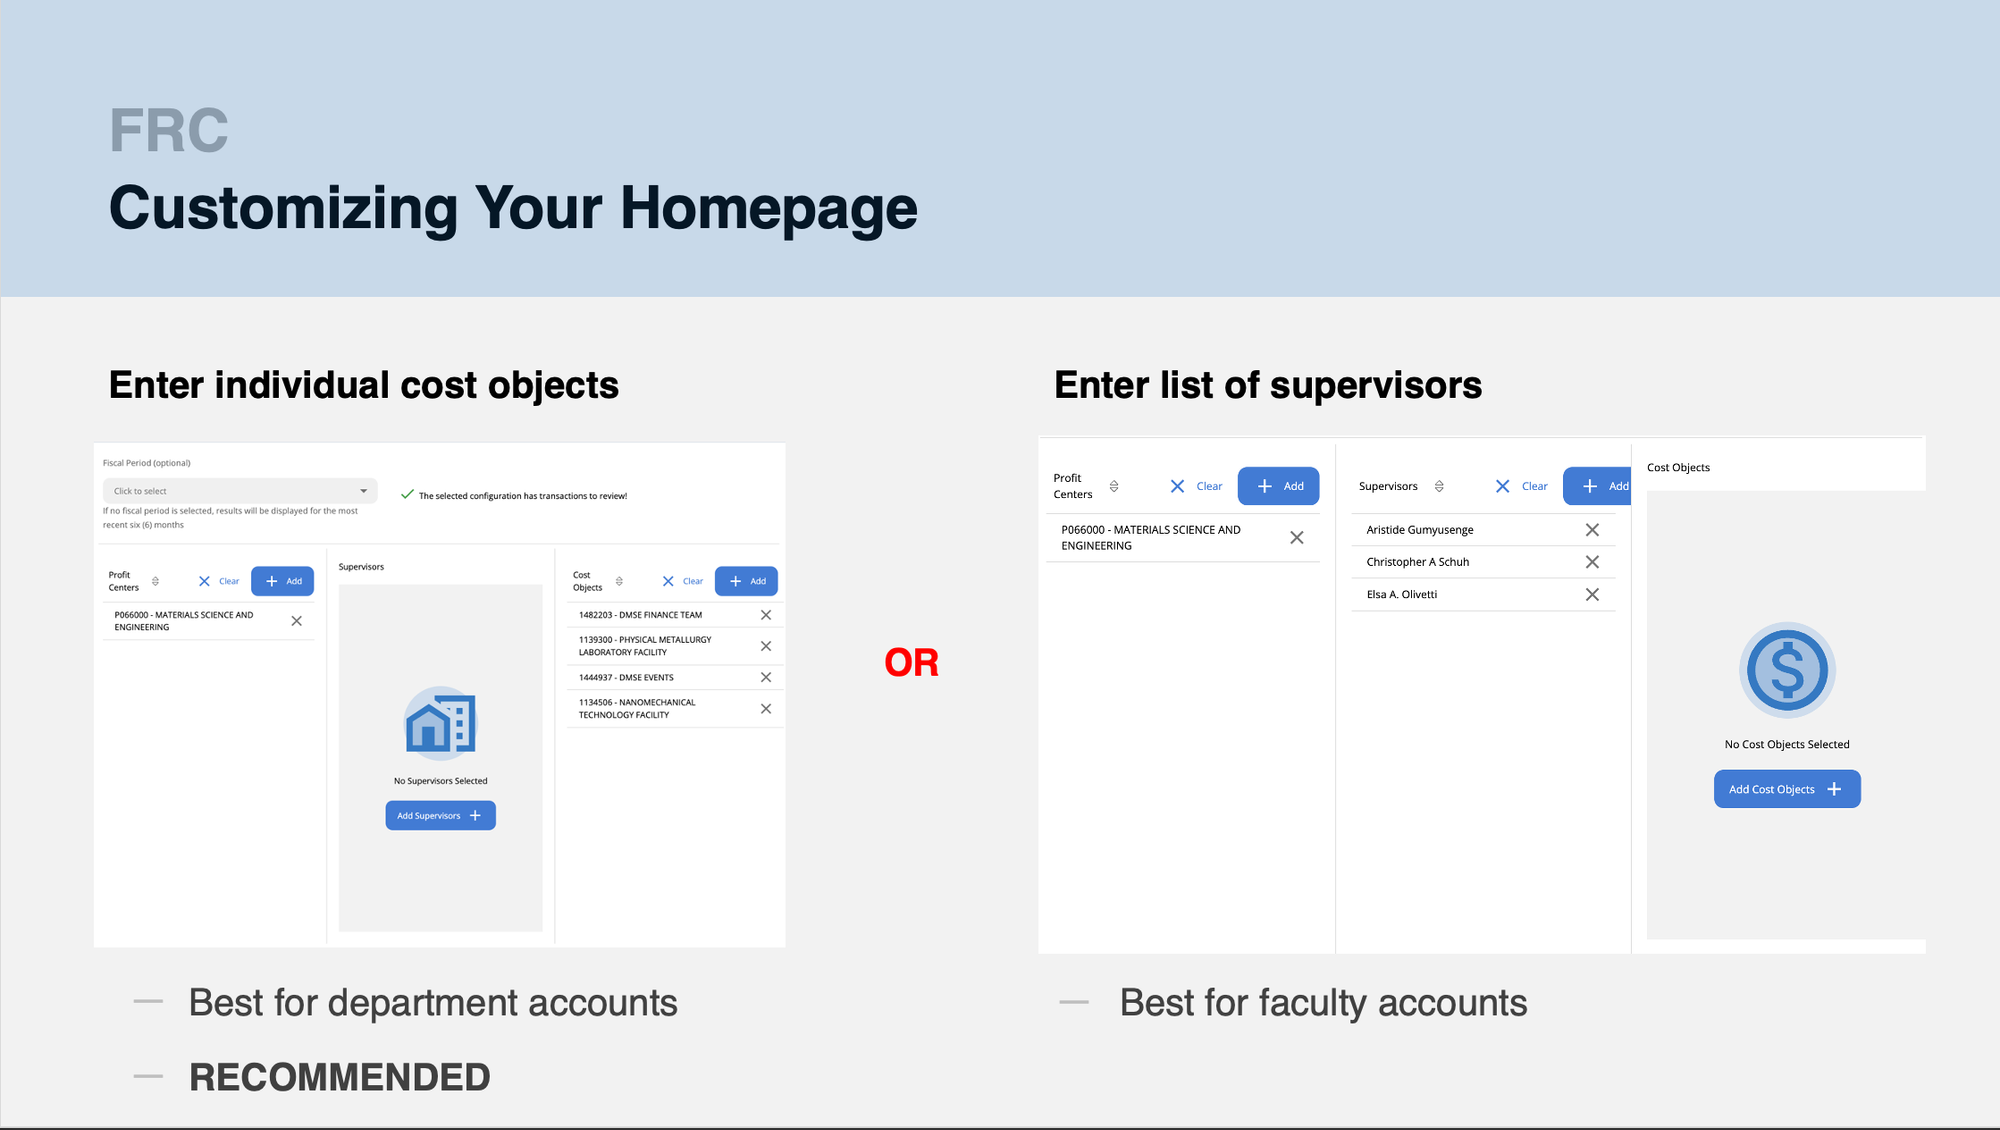 Accounts or Supervisors entered on your homepage will save from month to month, so you only need to set up this page once and add in new accounts as you receive them. 